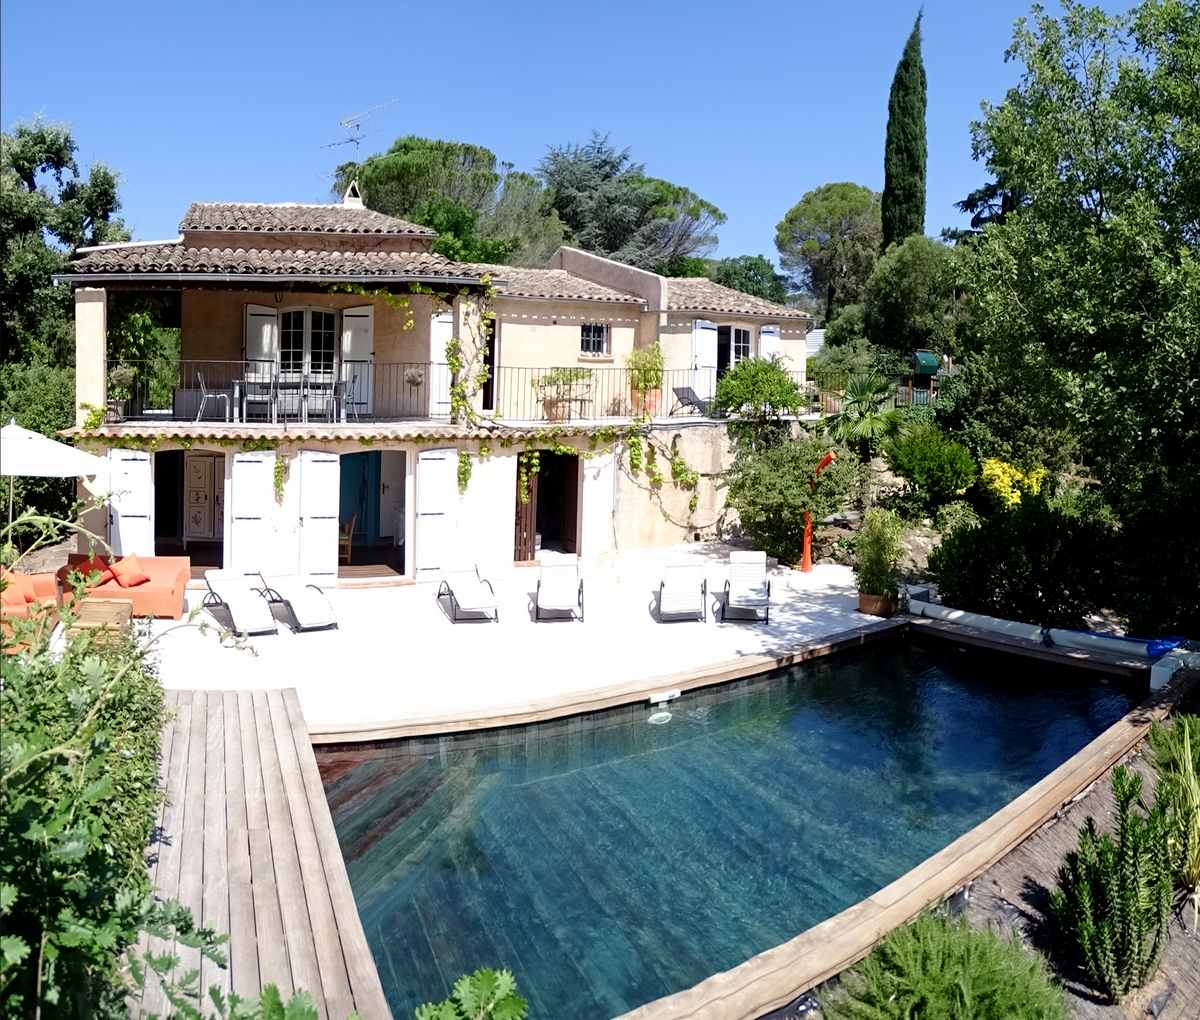 Villa with pool in Valescure Saint Raphael Var south France.